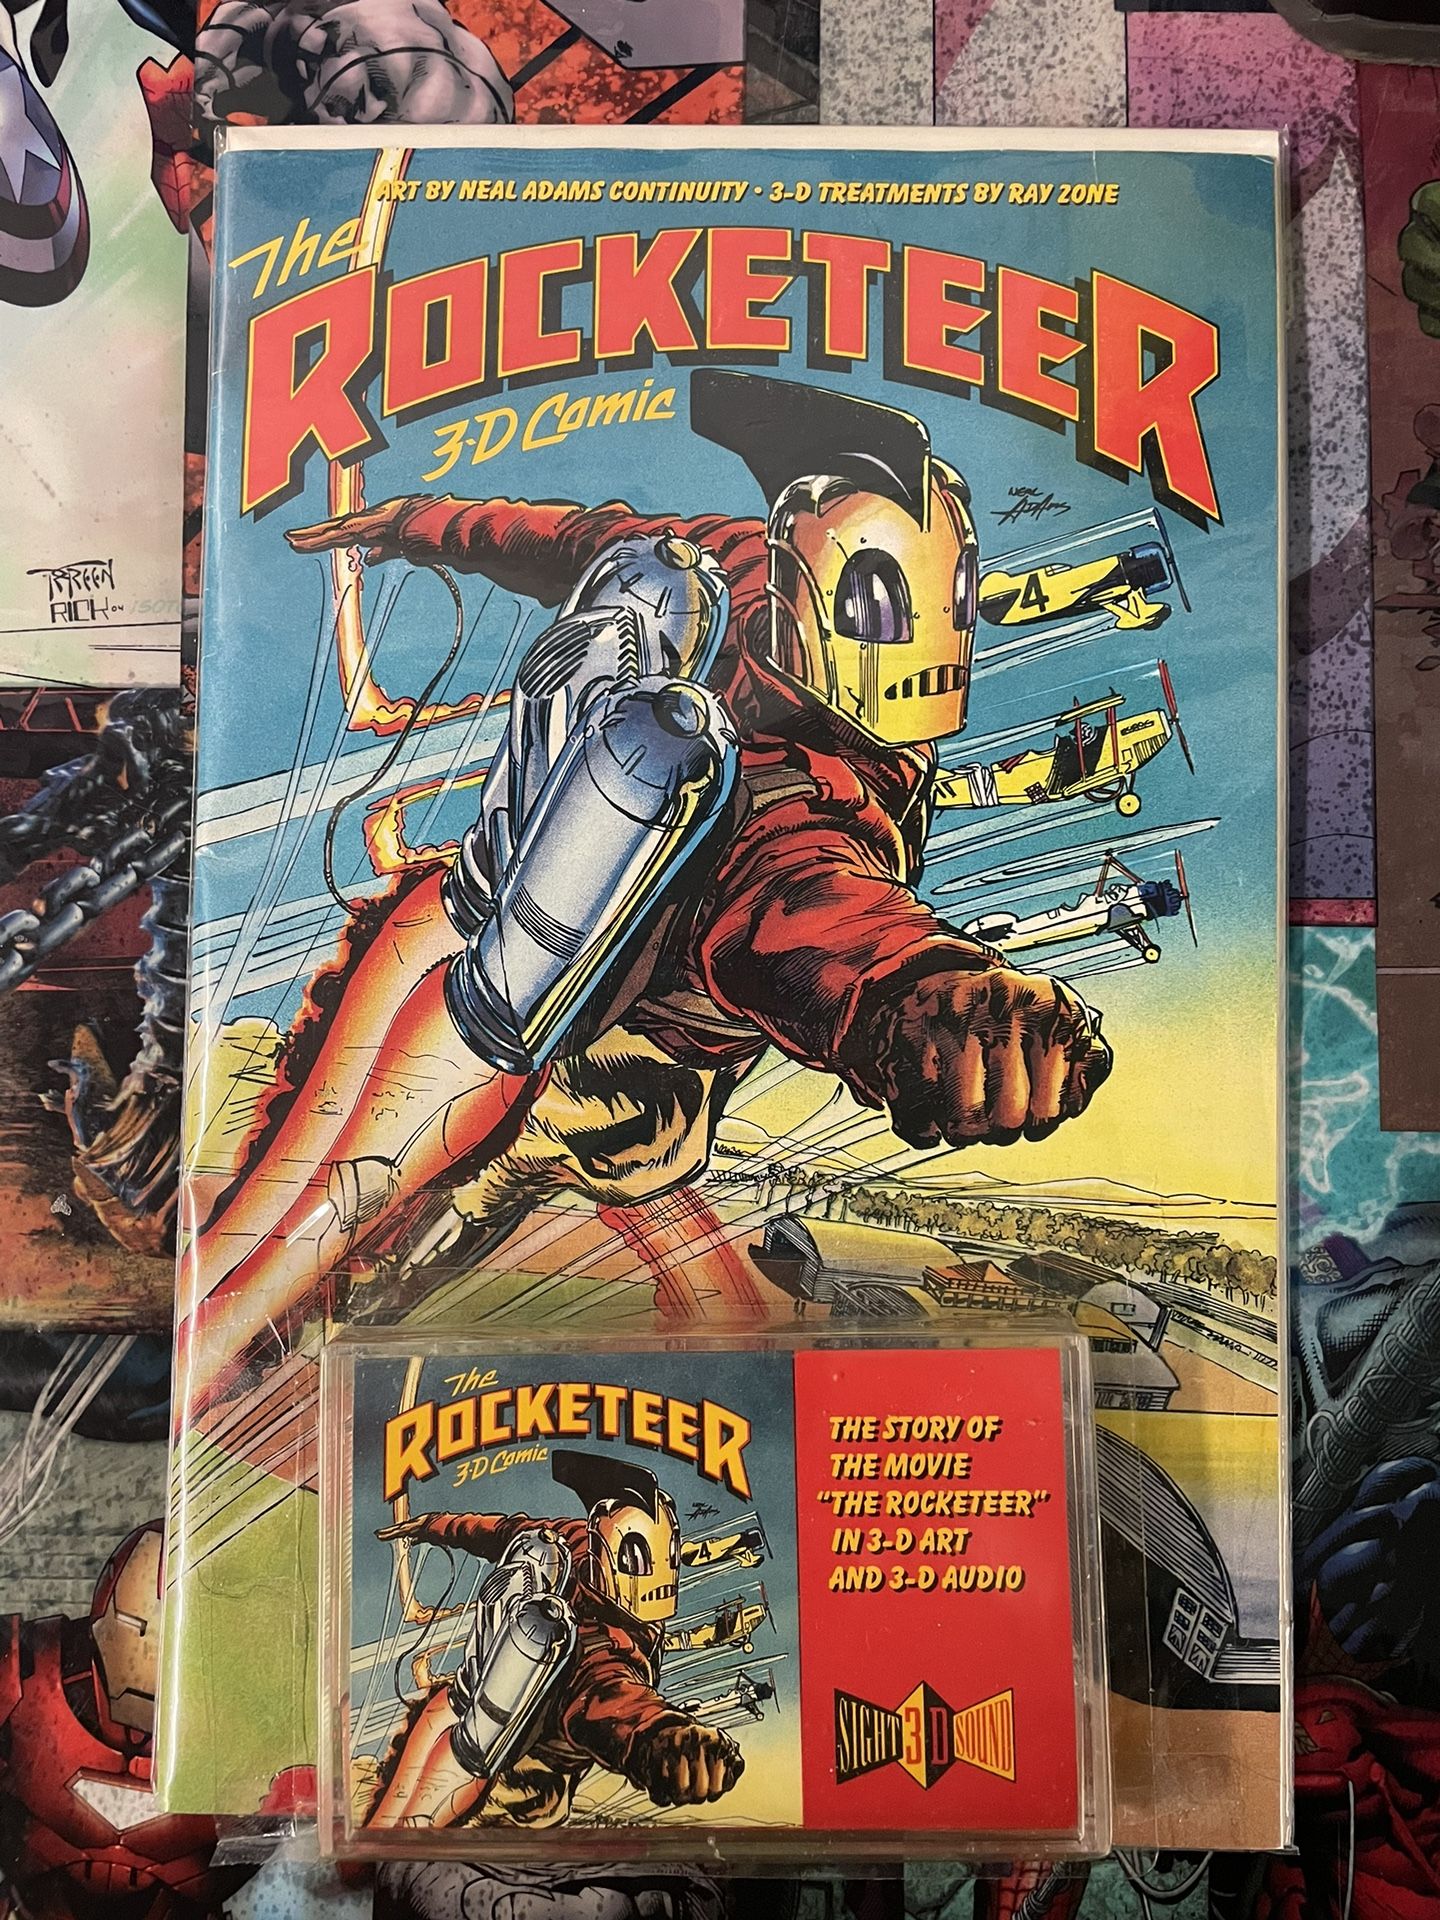 Rocketeer 3D Comic With Cassette Tape